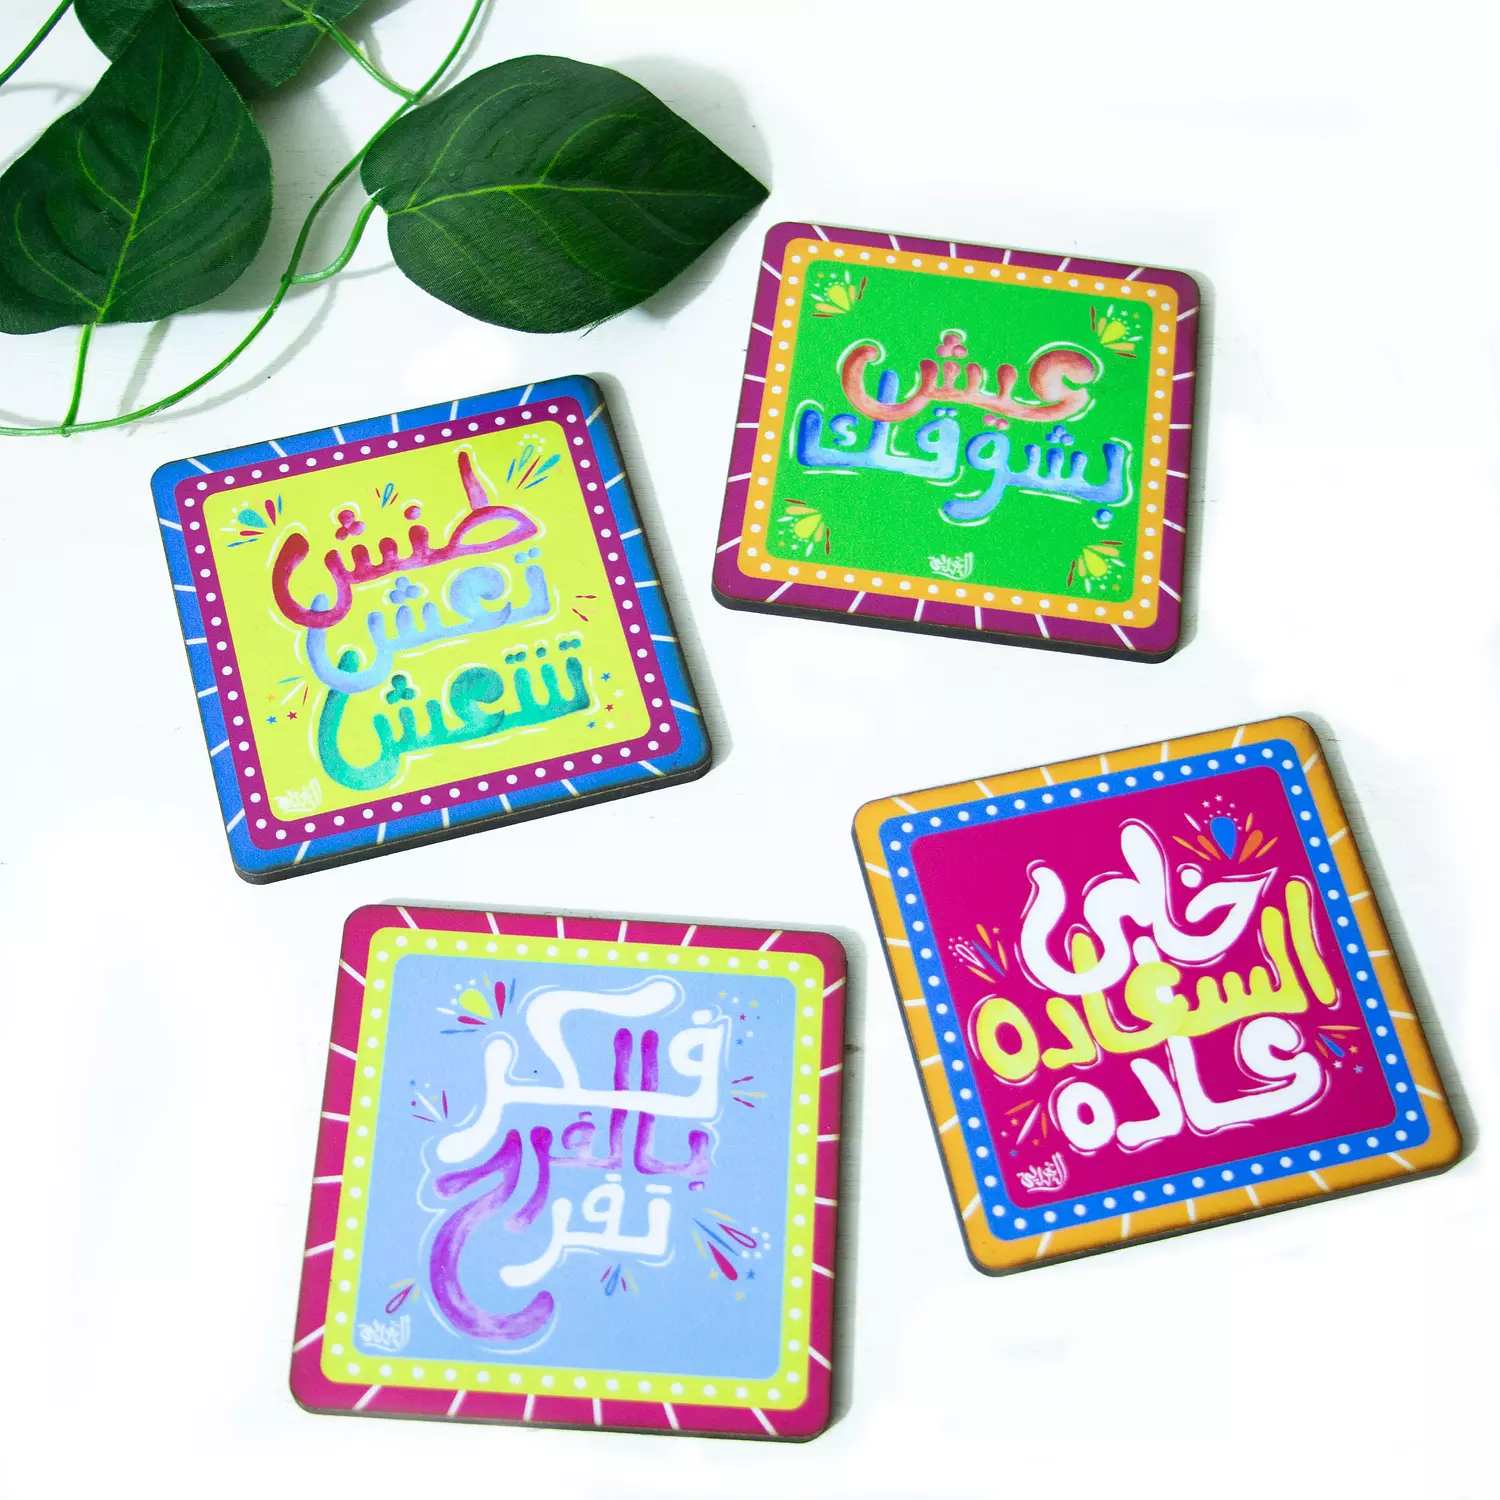 Calligraphy Colorful Coasters hover image